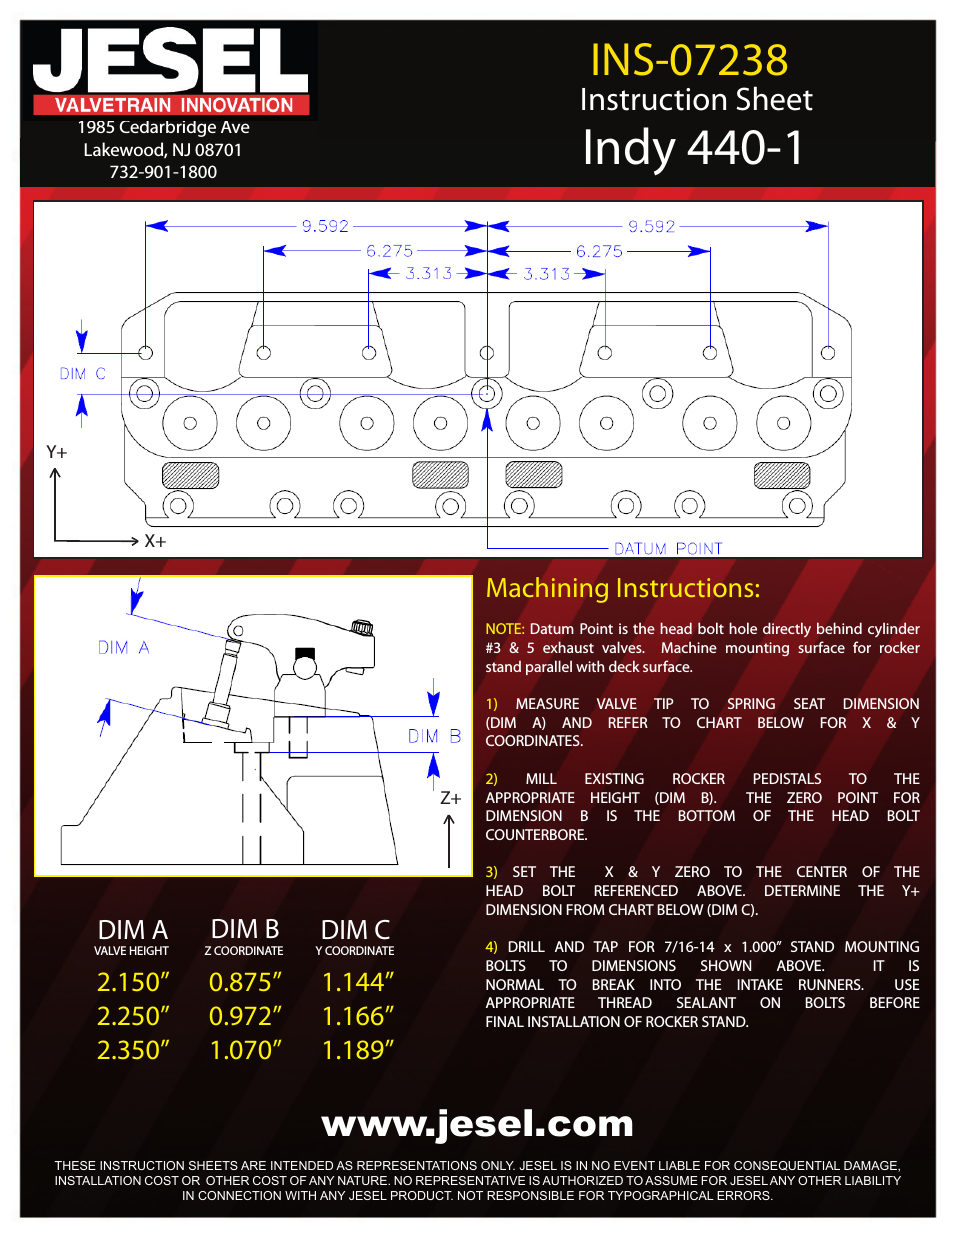 INS-07238 Indy 440-1